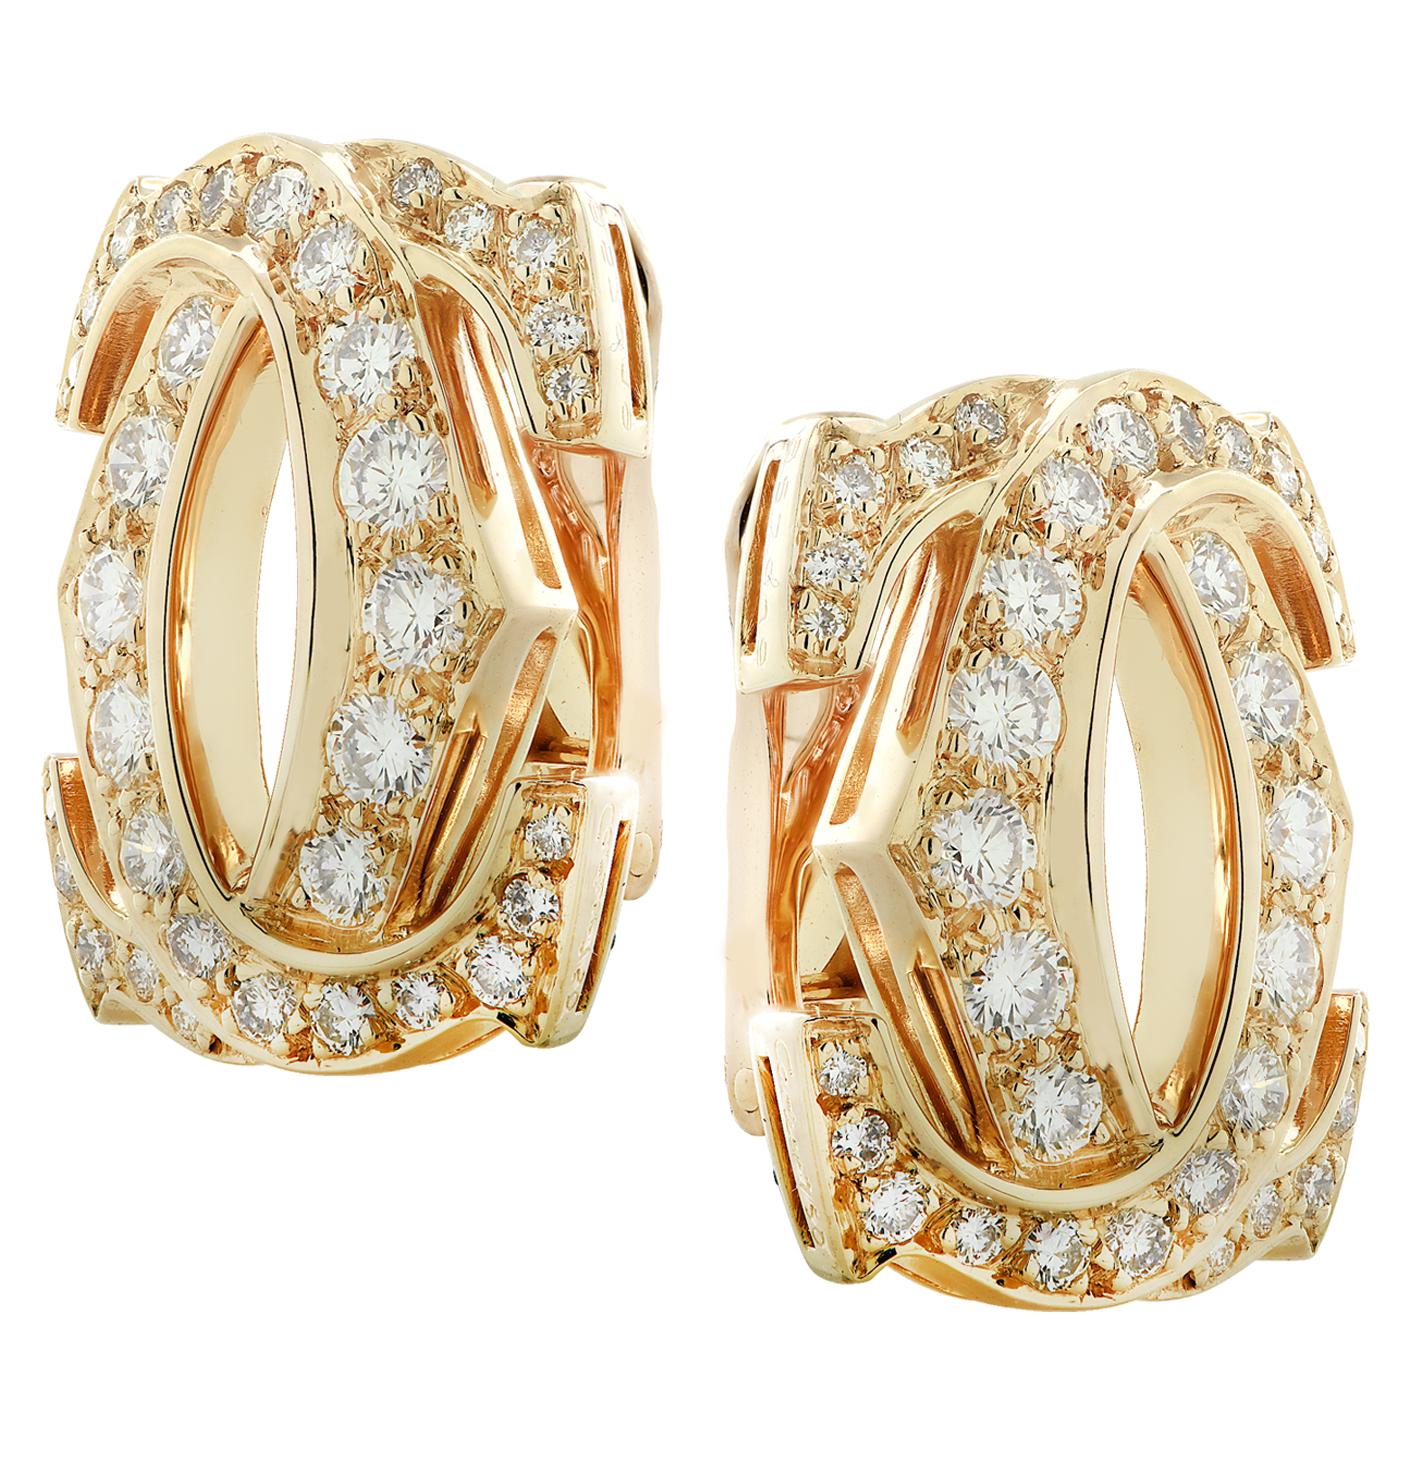 From the renowned House of Cartier, these vintage Double C Diamond Stud Clip-on Earrings are finely crafted in 18 karat yellow gold, and feature 68 round brilliant cut diamonds weighing approximately 2.25 carats total, E-F color, VVS-VS clarity. Two